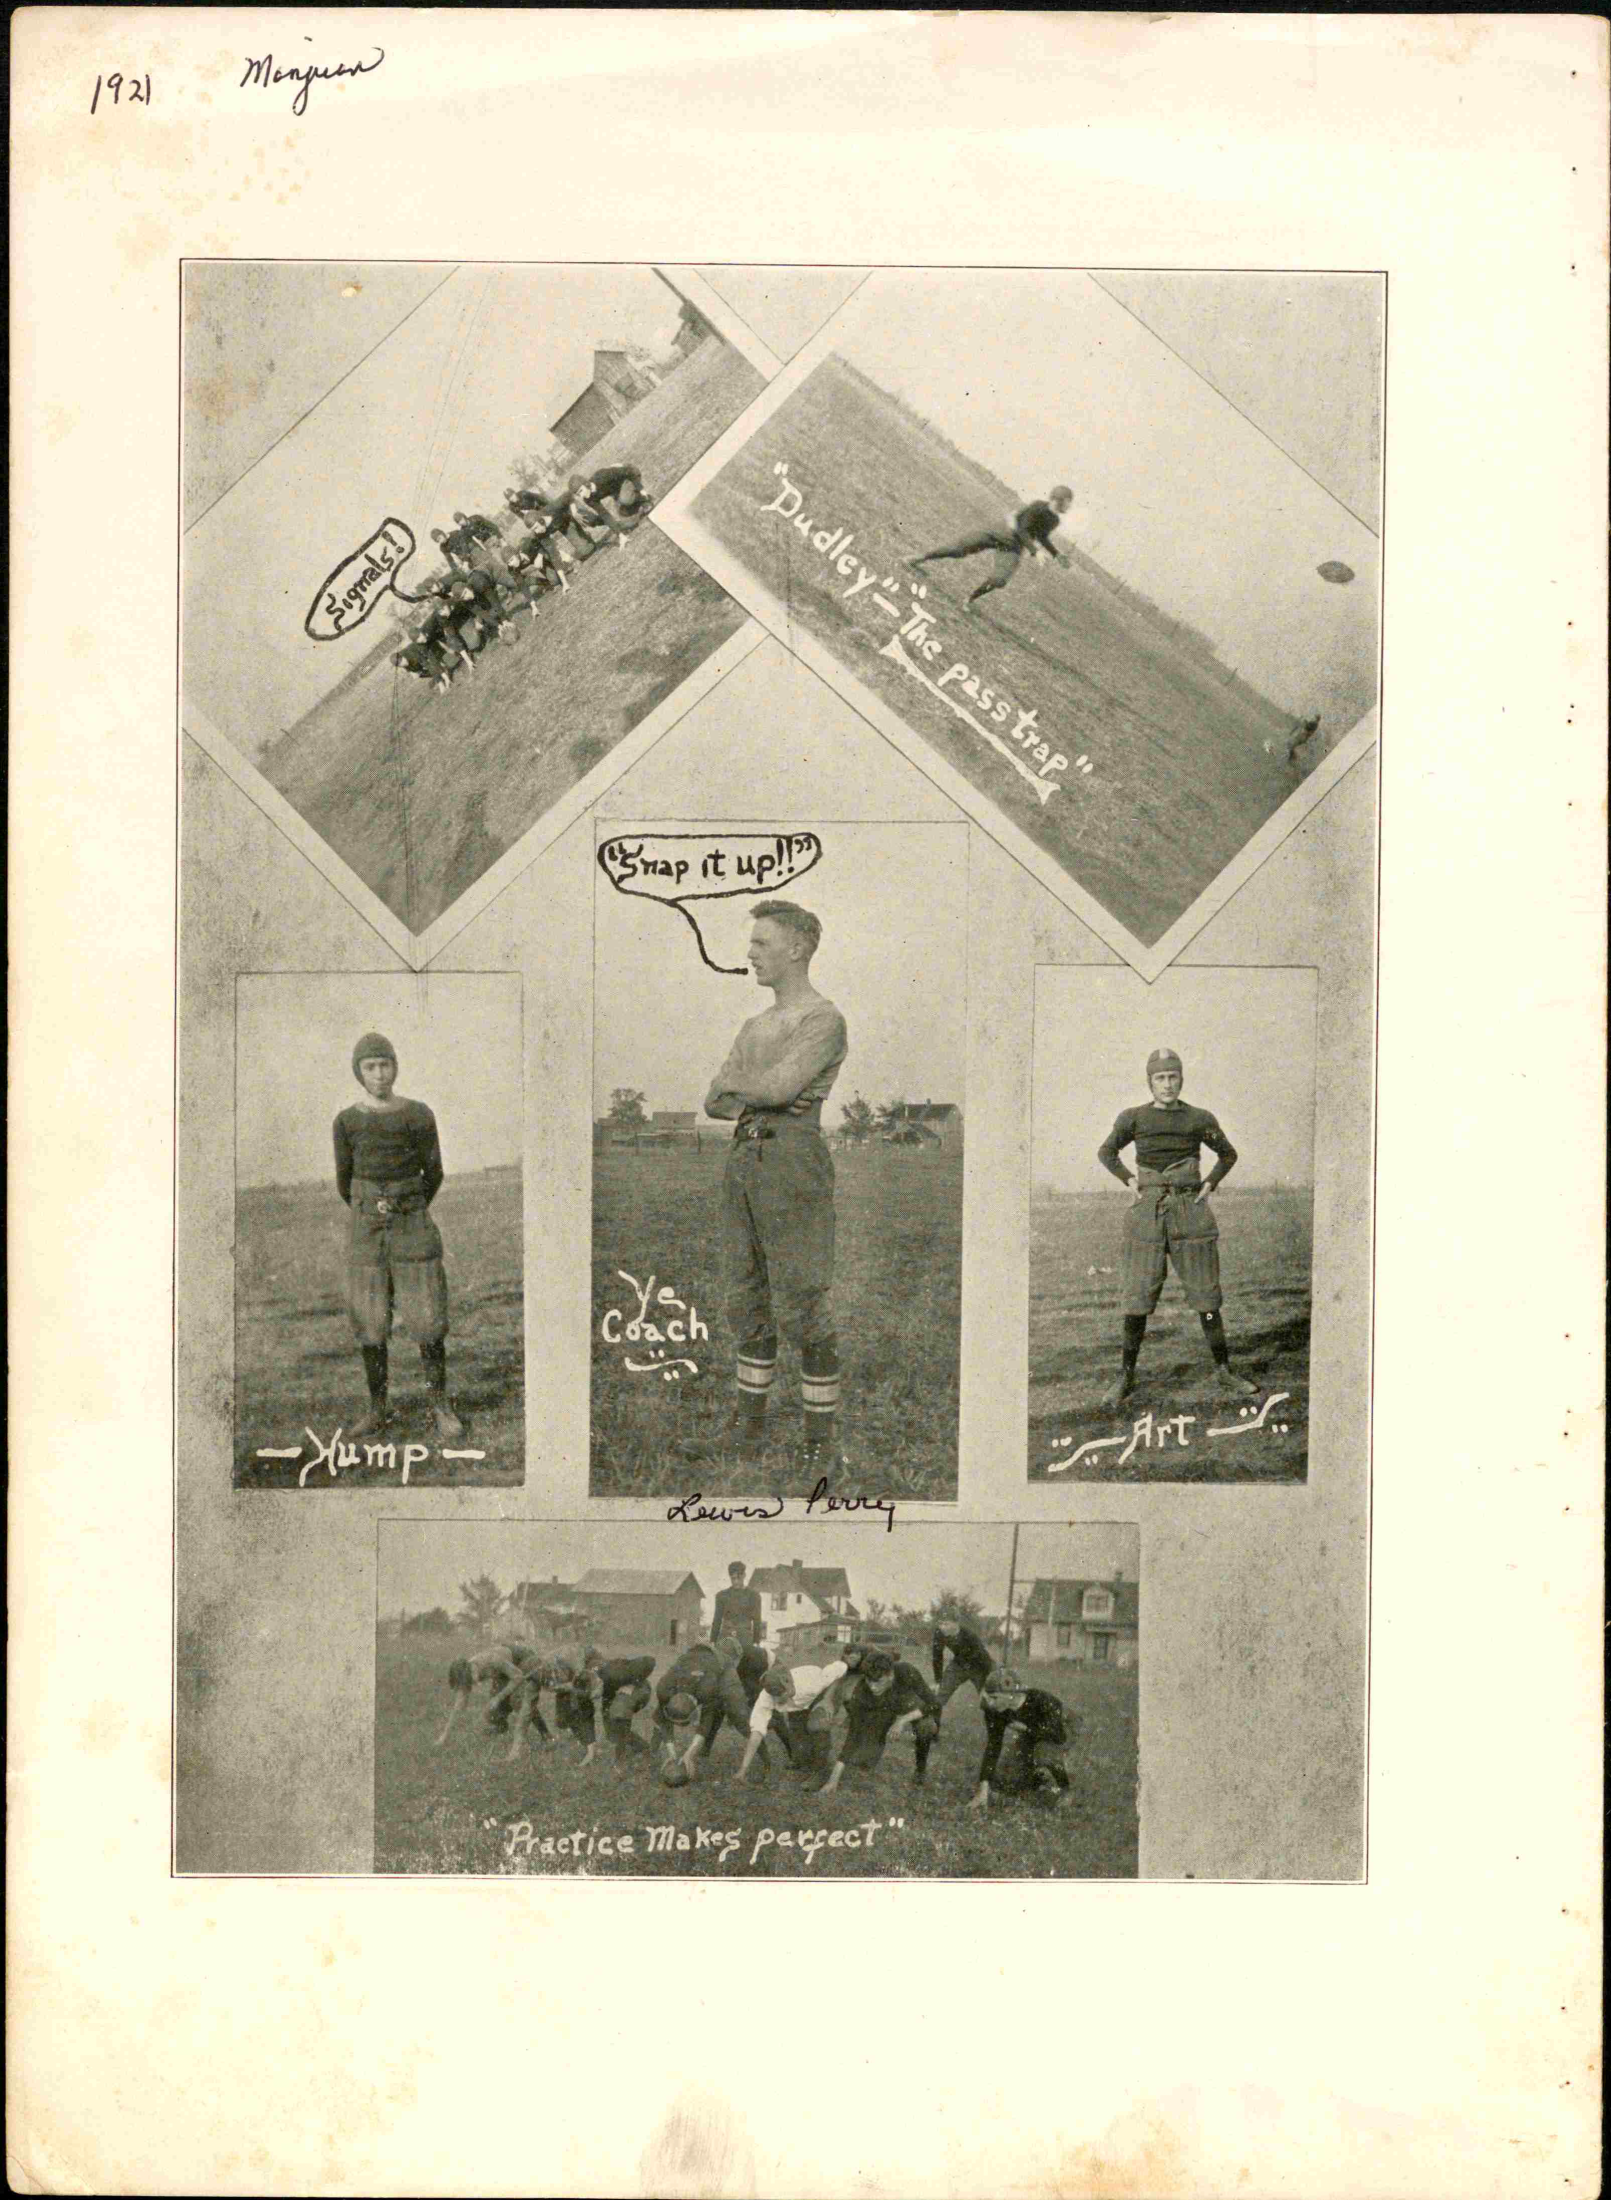 Album 15 MANLIUS HIGH SCHOOL FROM 1912-1924 Page 08